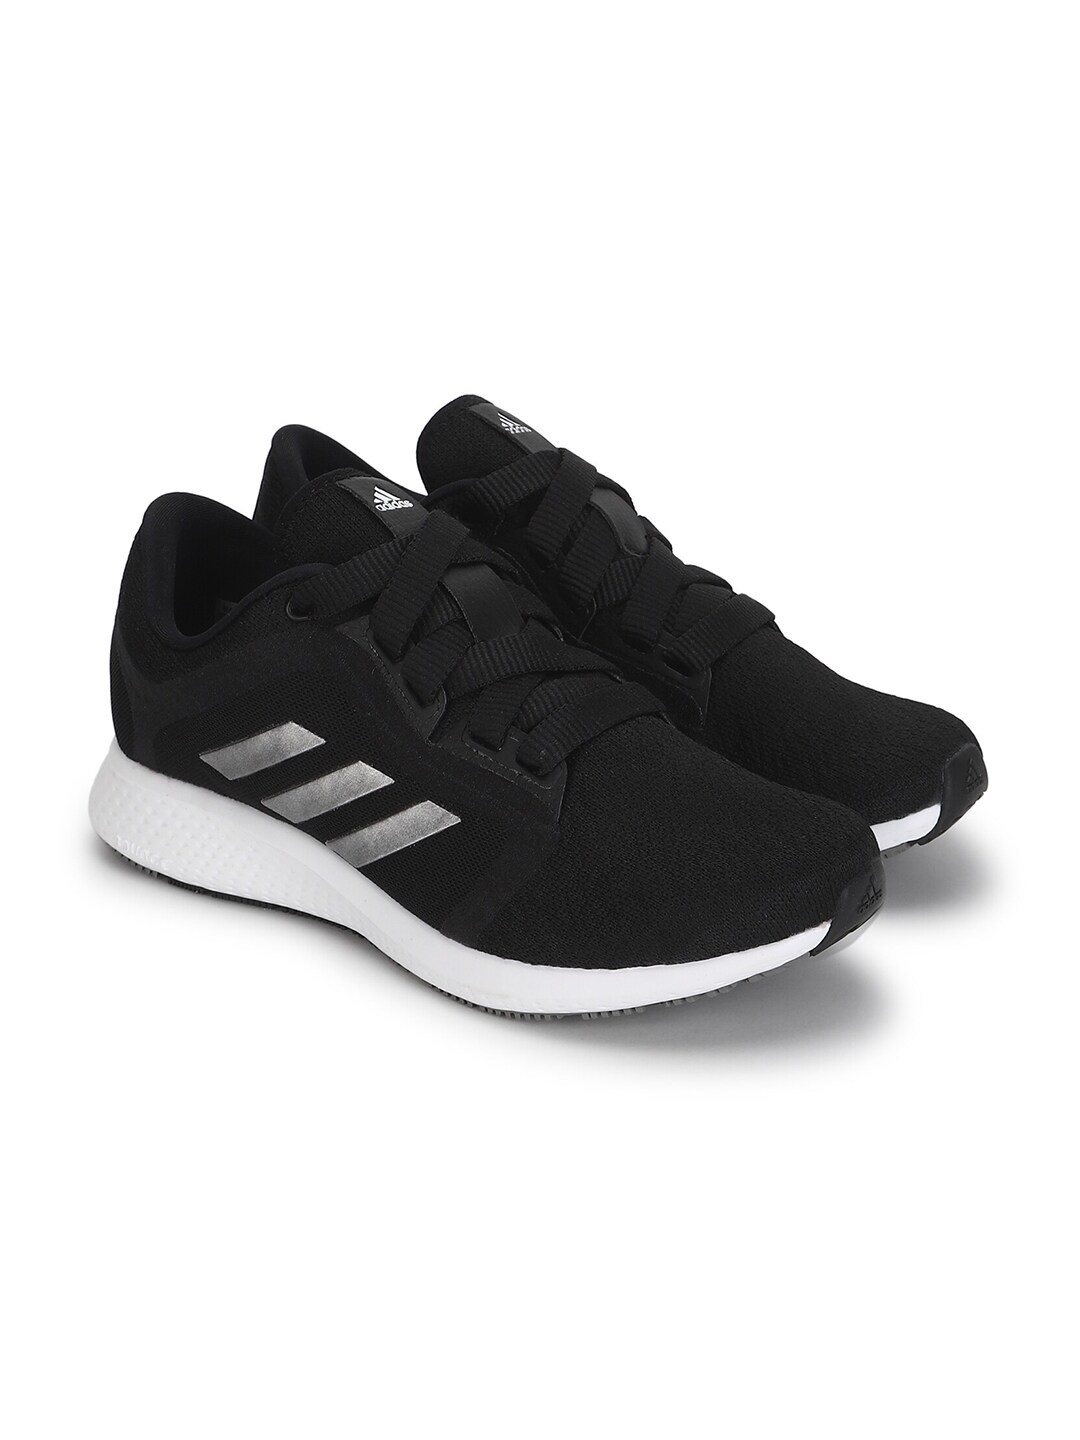 ADIDAS Women Black Textile Running Shoes Price in India